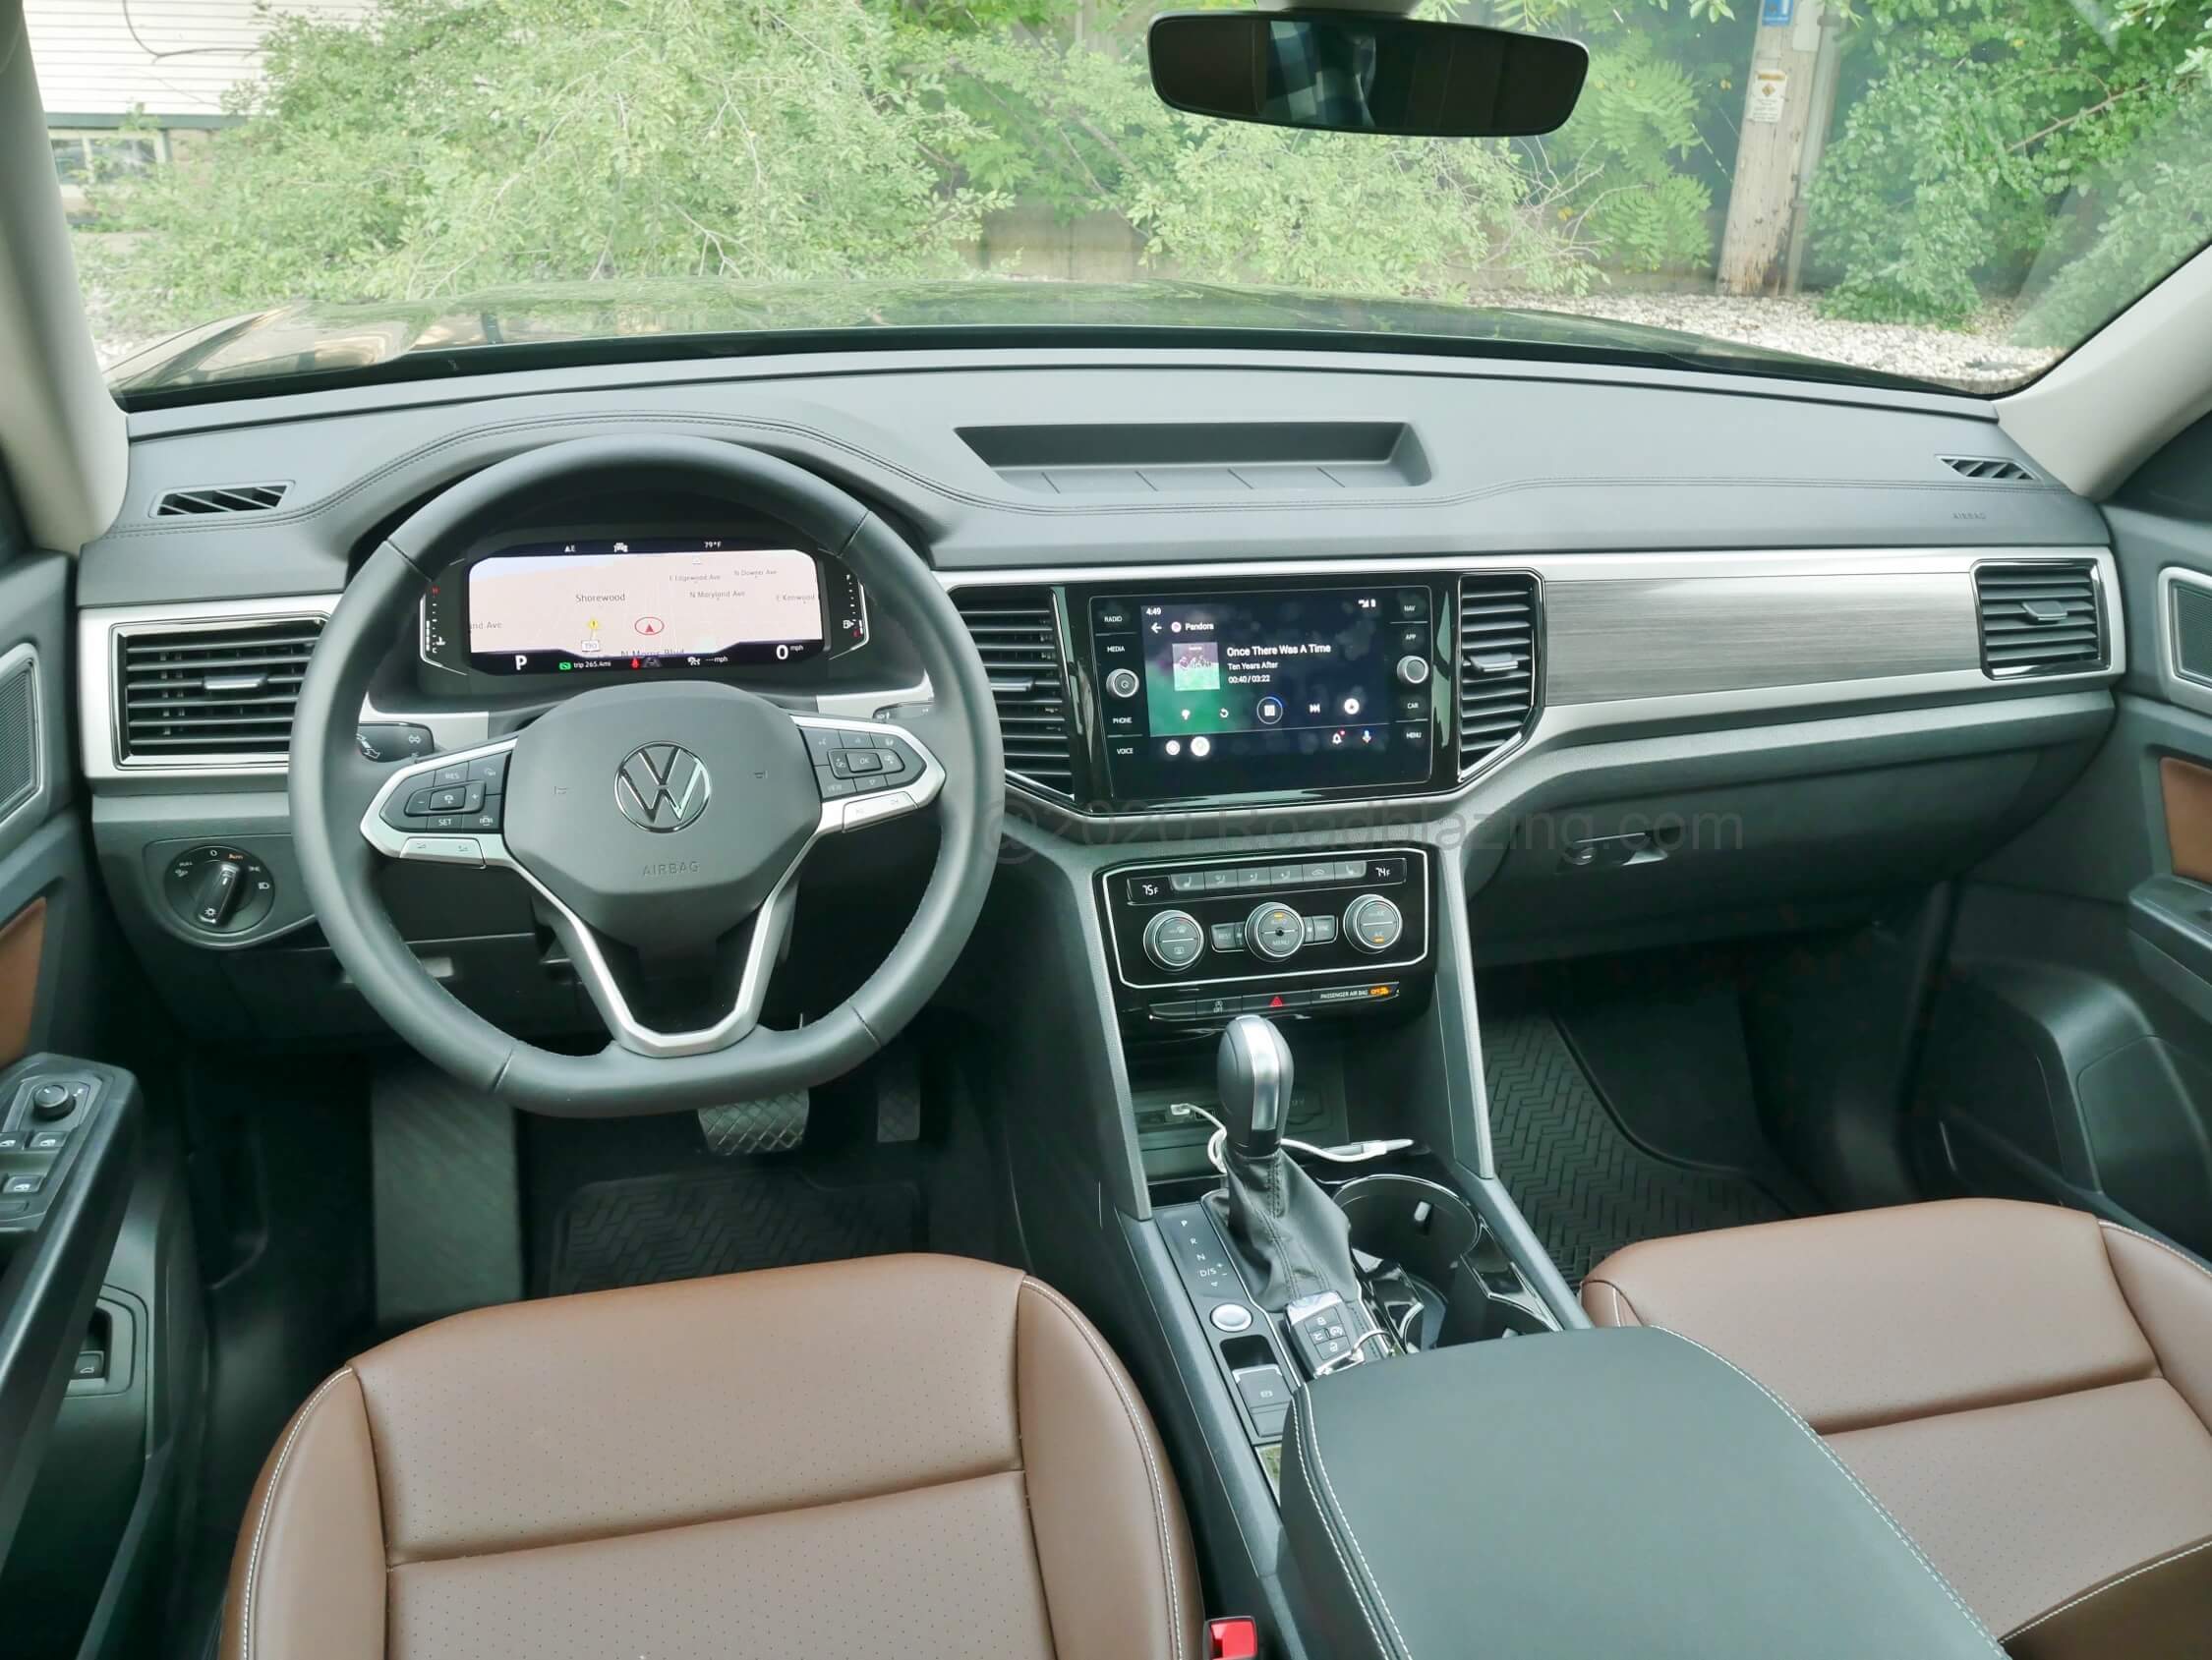 2021 Volkswagen Atlas V6 SEL: landscape orientation of native Navigation map in 10.2" Digital Cockpit driver's cluster and Android Auto's Pandora music app in the 8.0" touch infotainment display